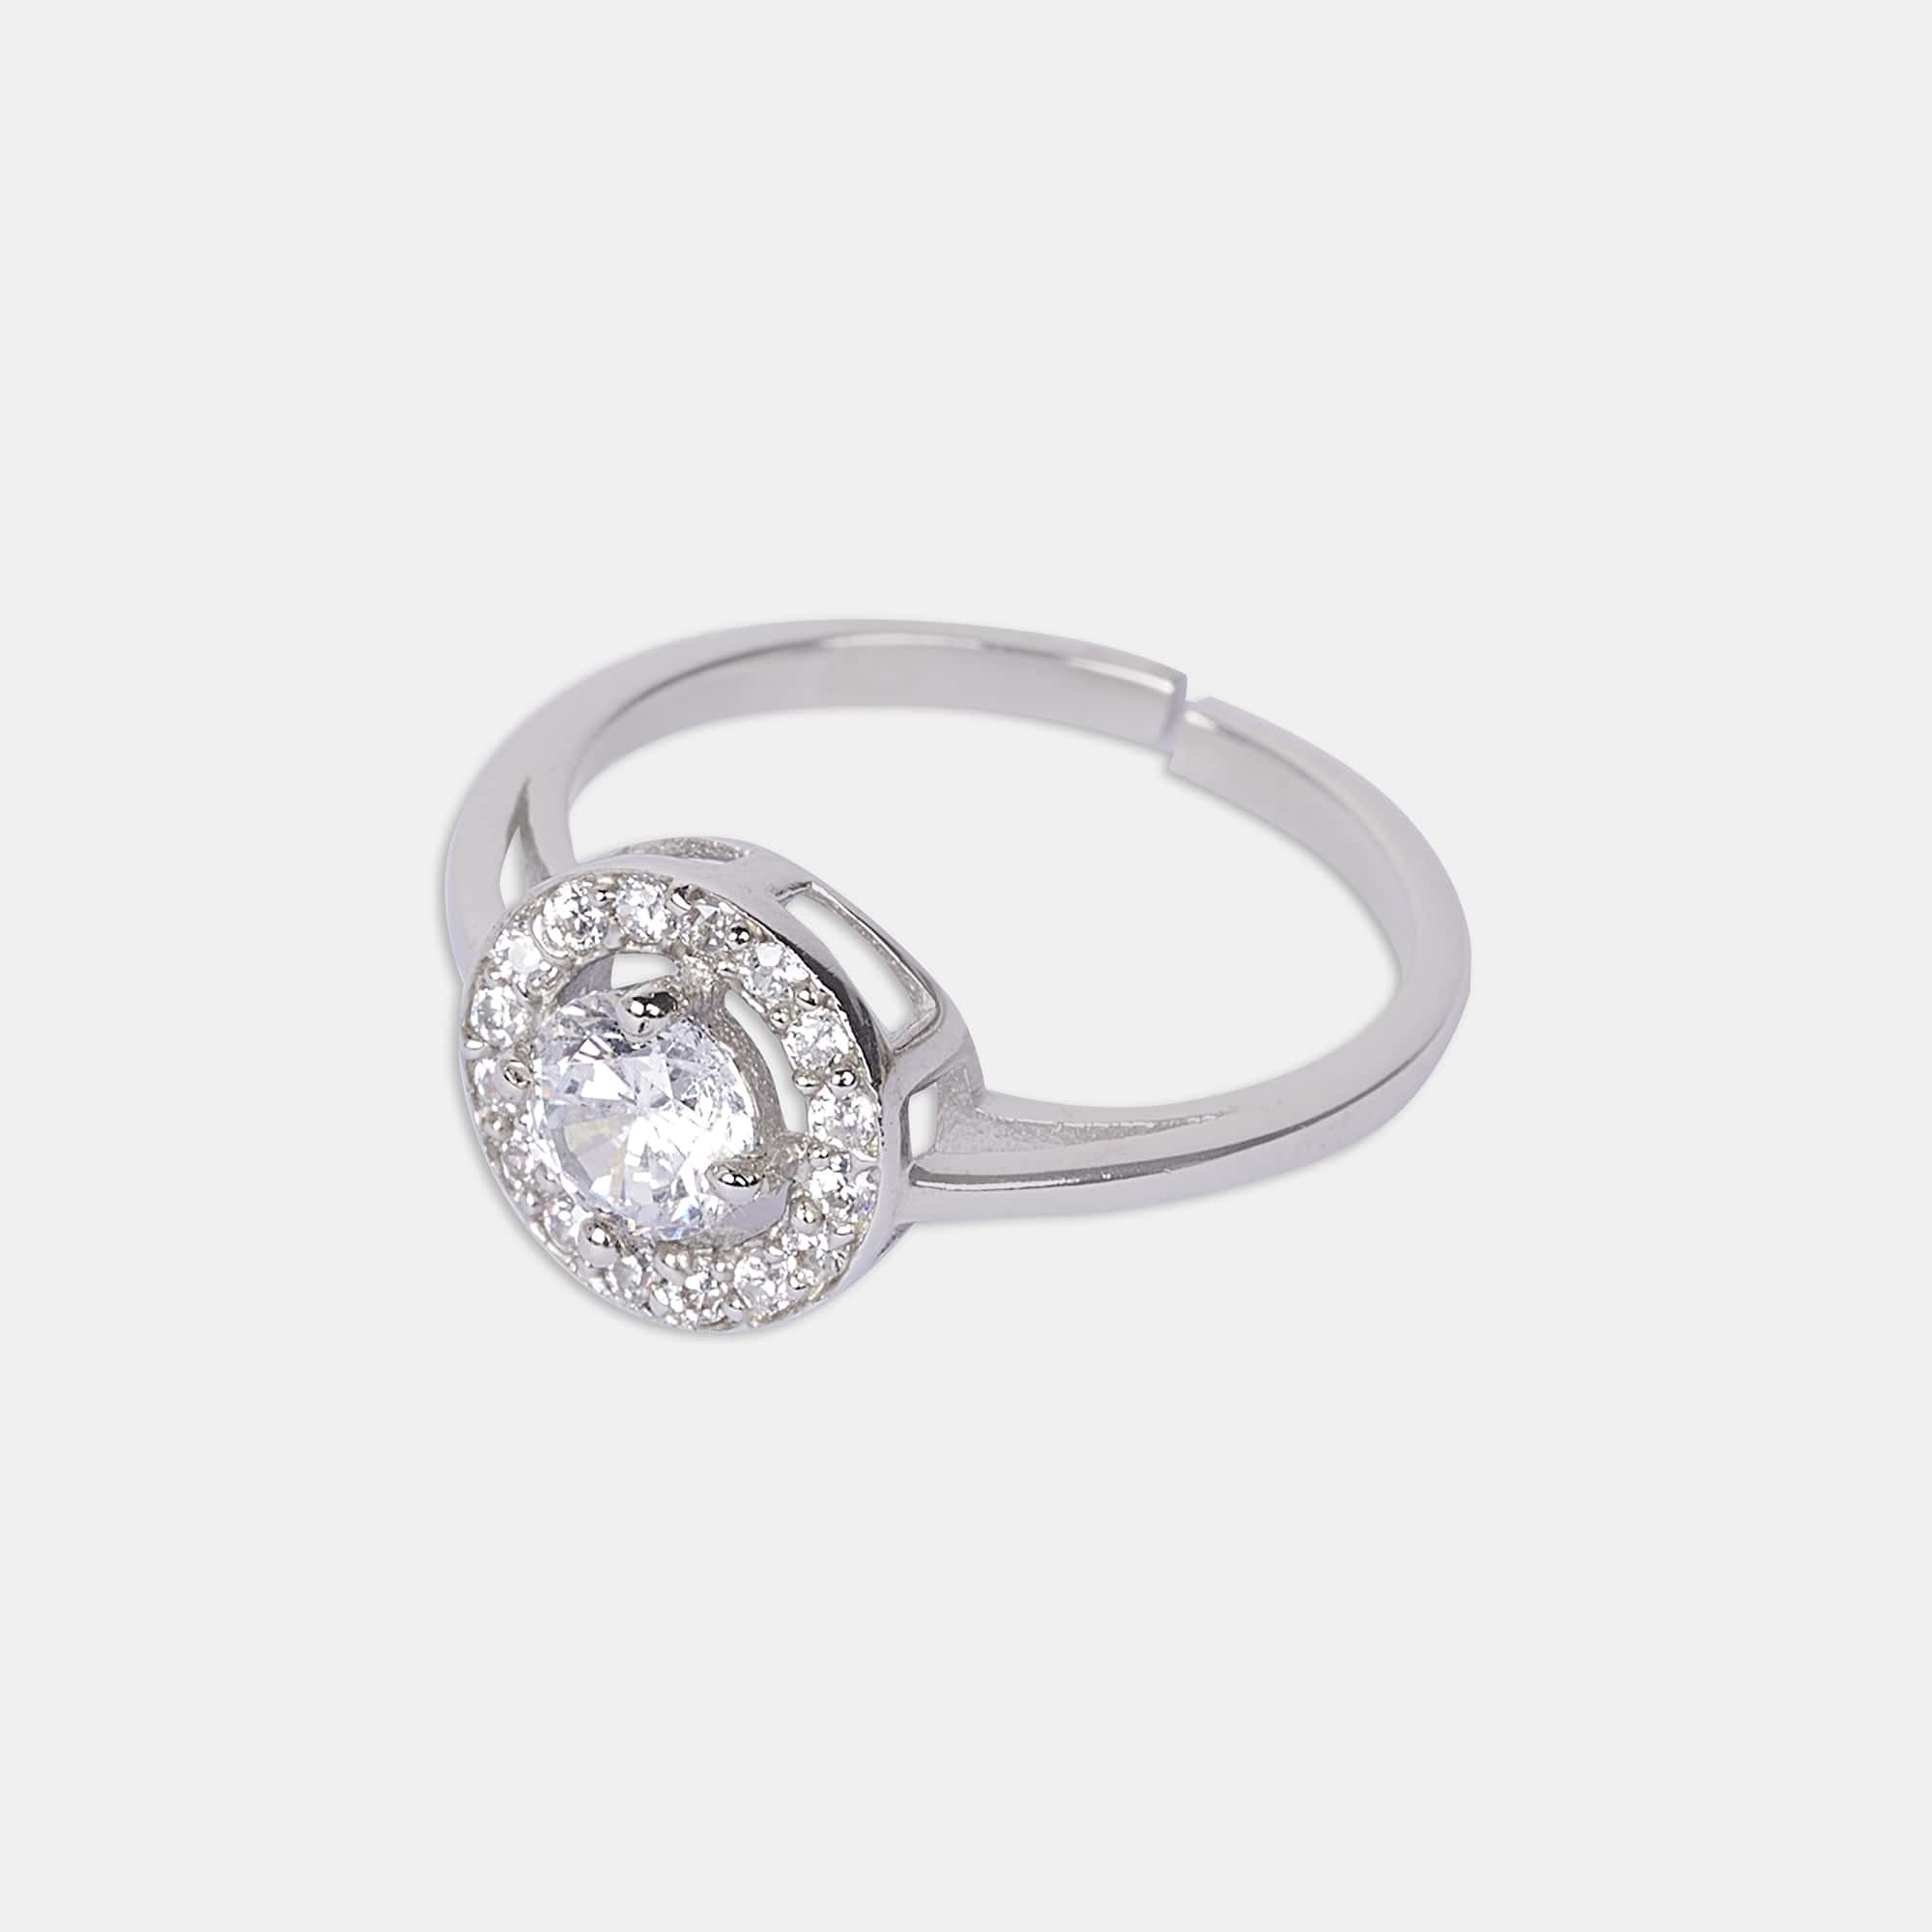 Experience the enchantment of a sterling silver ring, gleaming against a flawless white canvas, emanating everlasting charm.